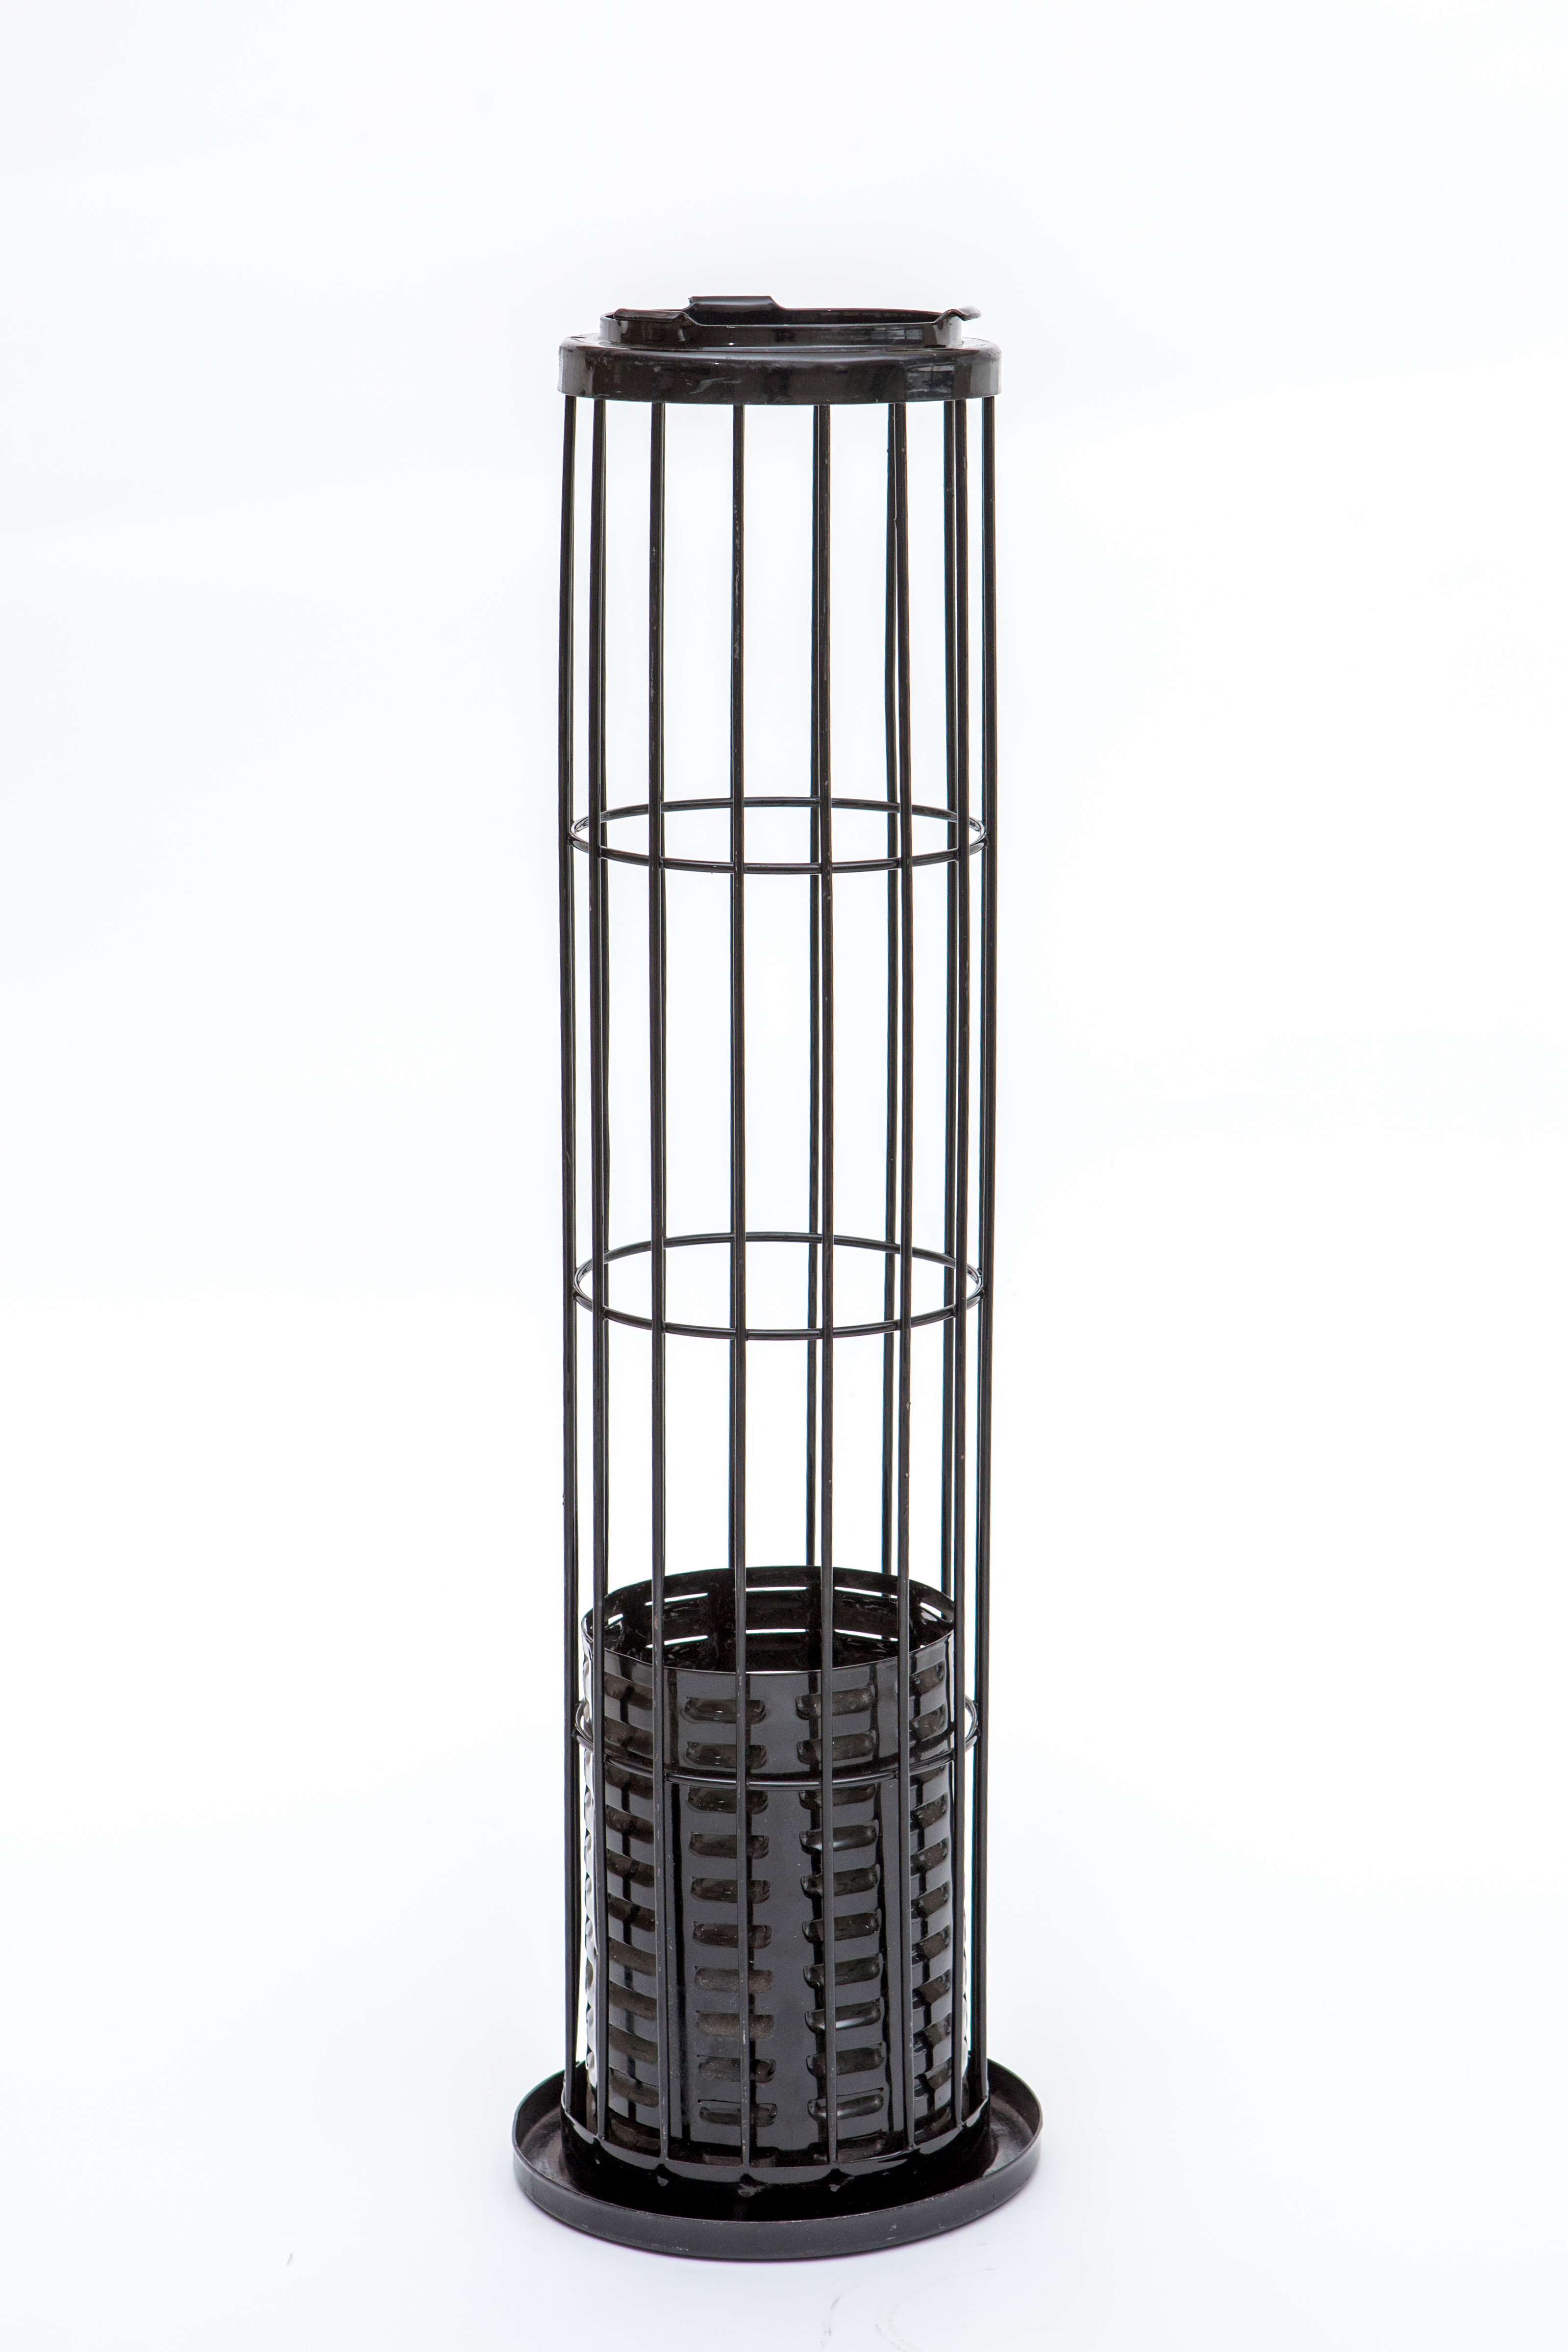 Technical requirements for Waste incineration filter bag cages